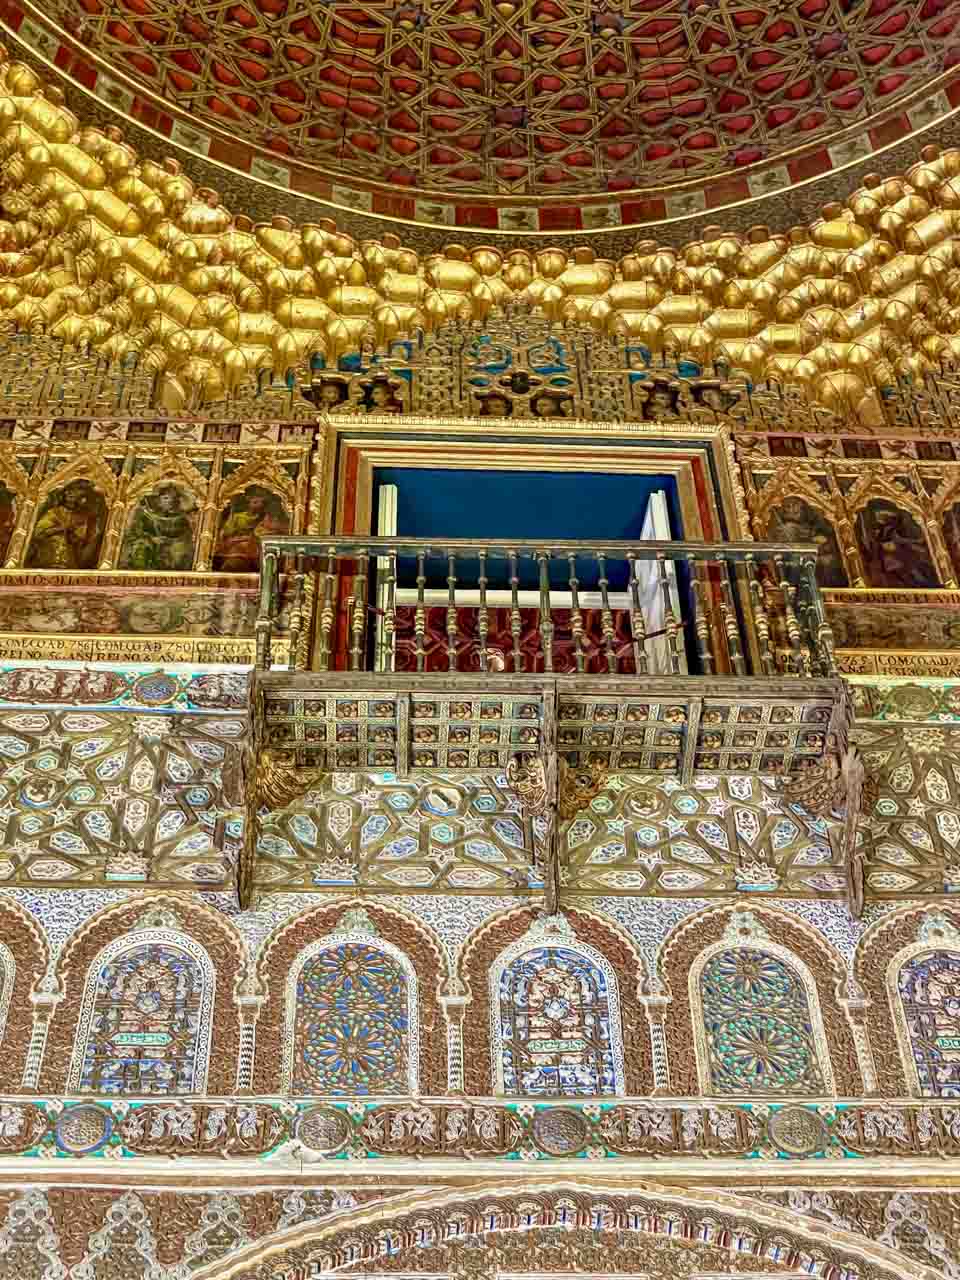 Mosaic walls and ceiling inside a building in the Islamic style of architecture.